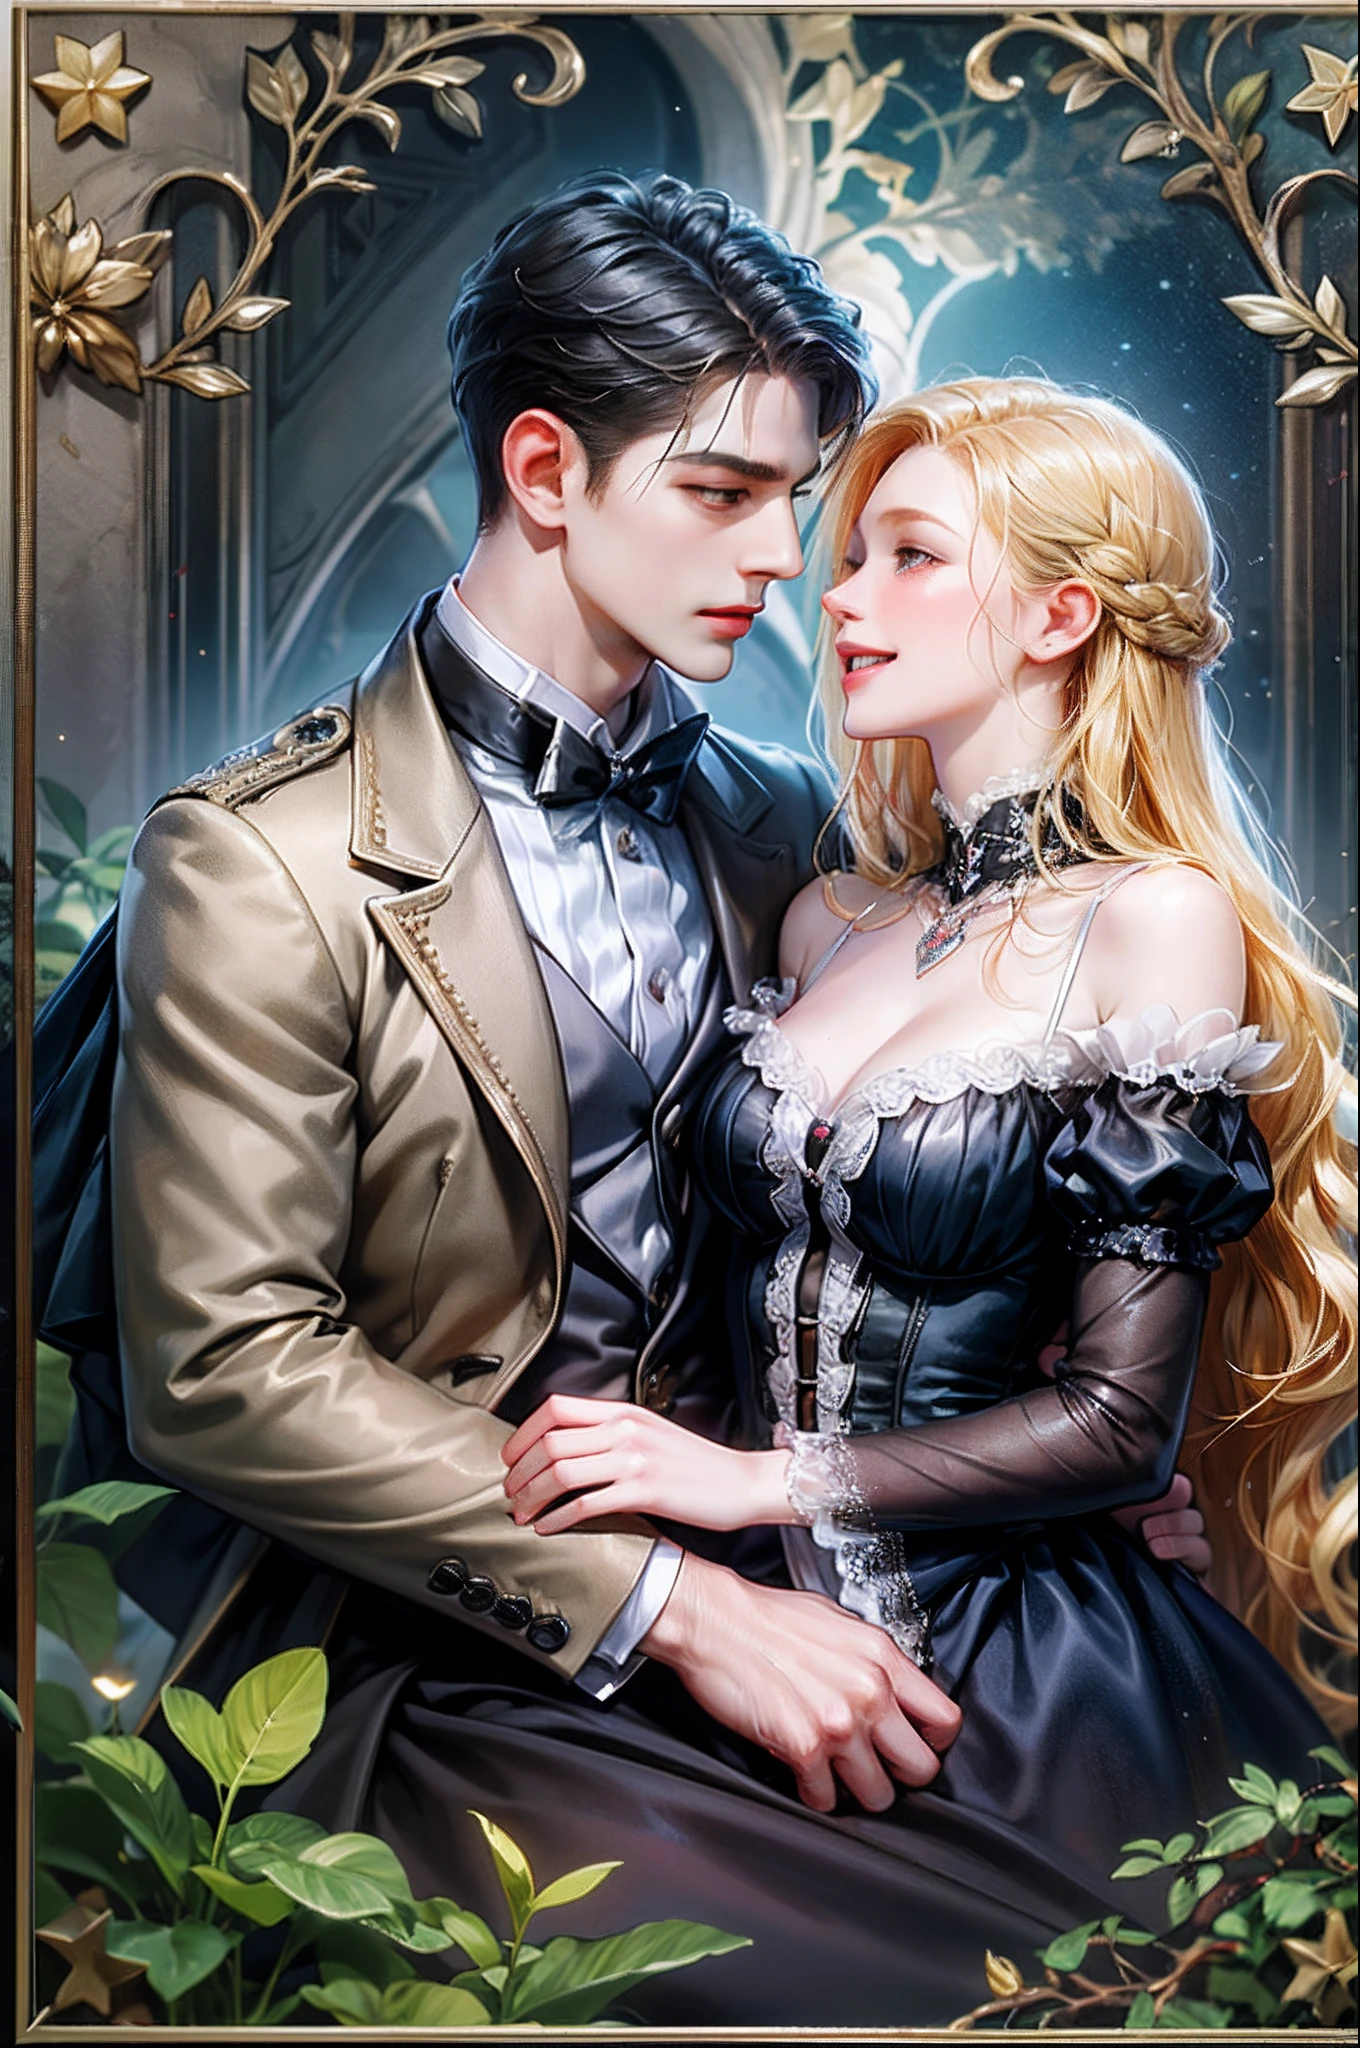 (absurdress, hight resolution, overdetalization), 2others, couple, 1 man and 1 woman, Mature, Difference in height, Different hair color, a happy, Love, cuddling, upper-body, hairlong, black hair and blonde hair, fantasy, night garden, Gothic atmosphere